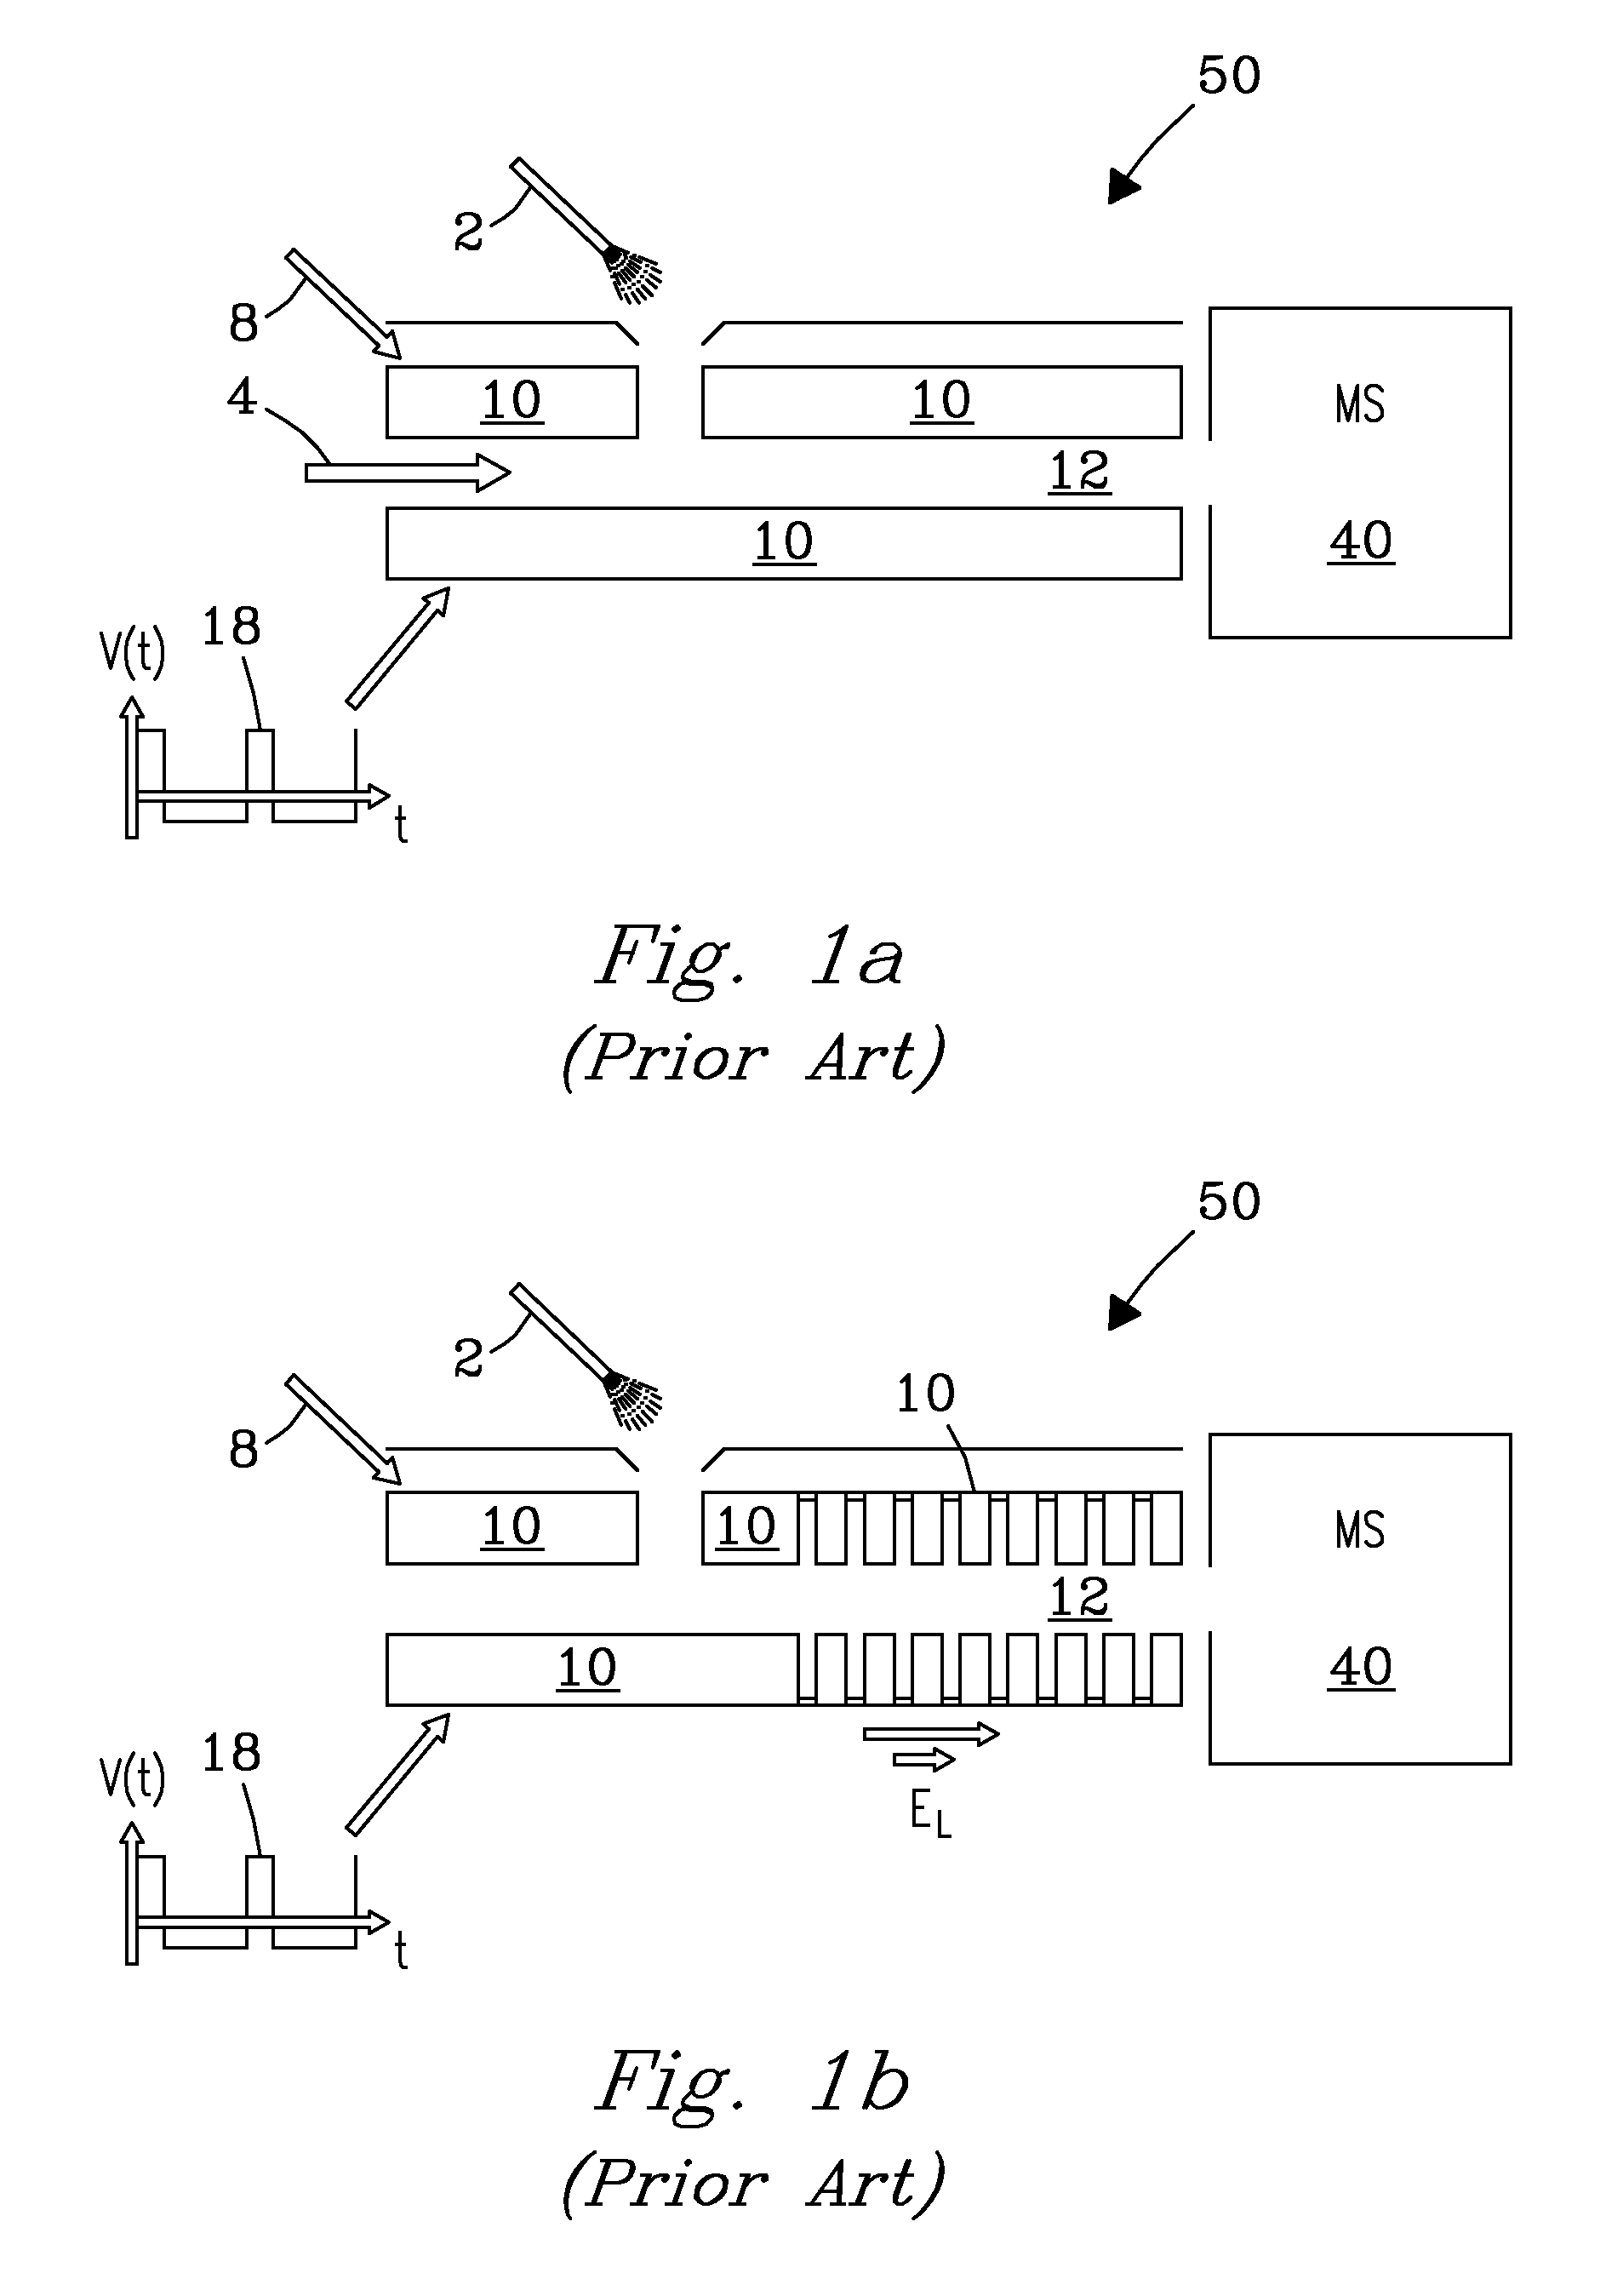 Platform for field asymmetric waveform ion mobility spectrometry with ion propulsion modes employing gas flow and electric field